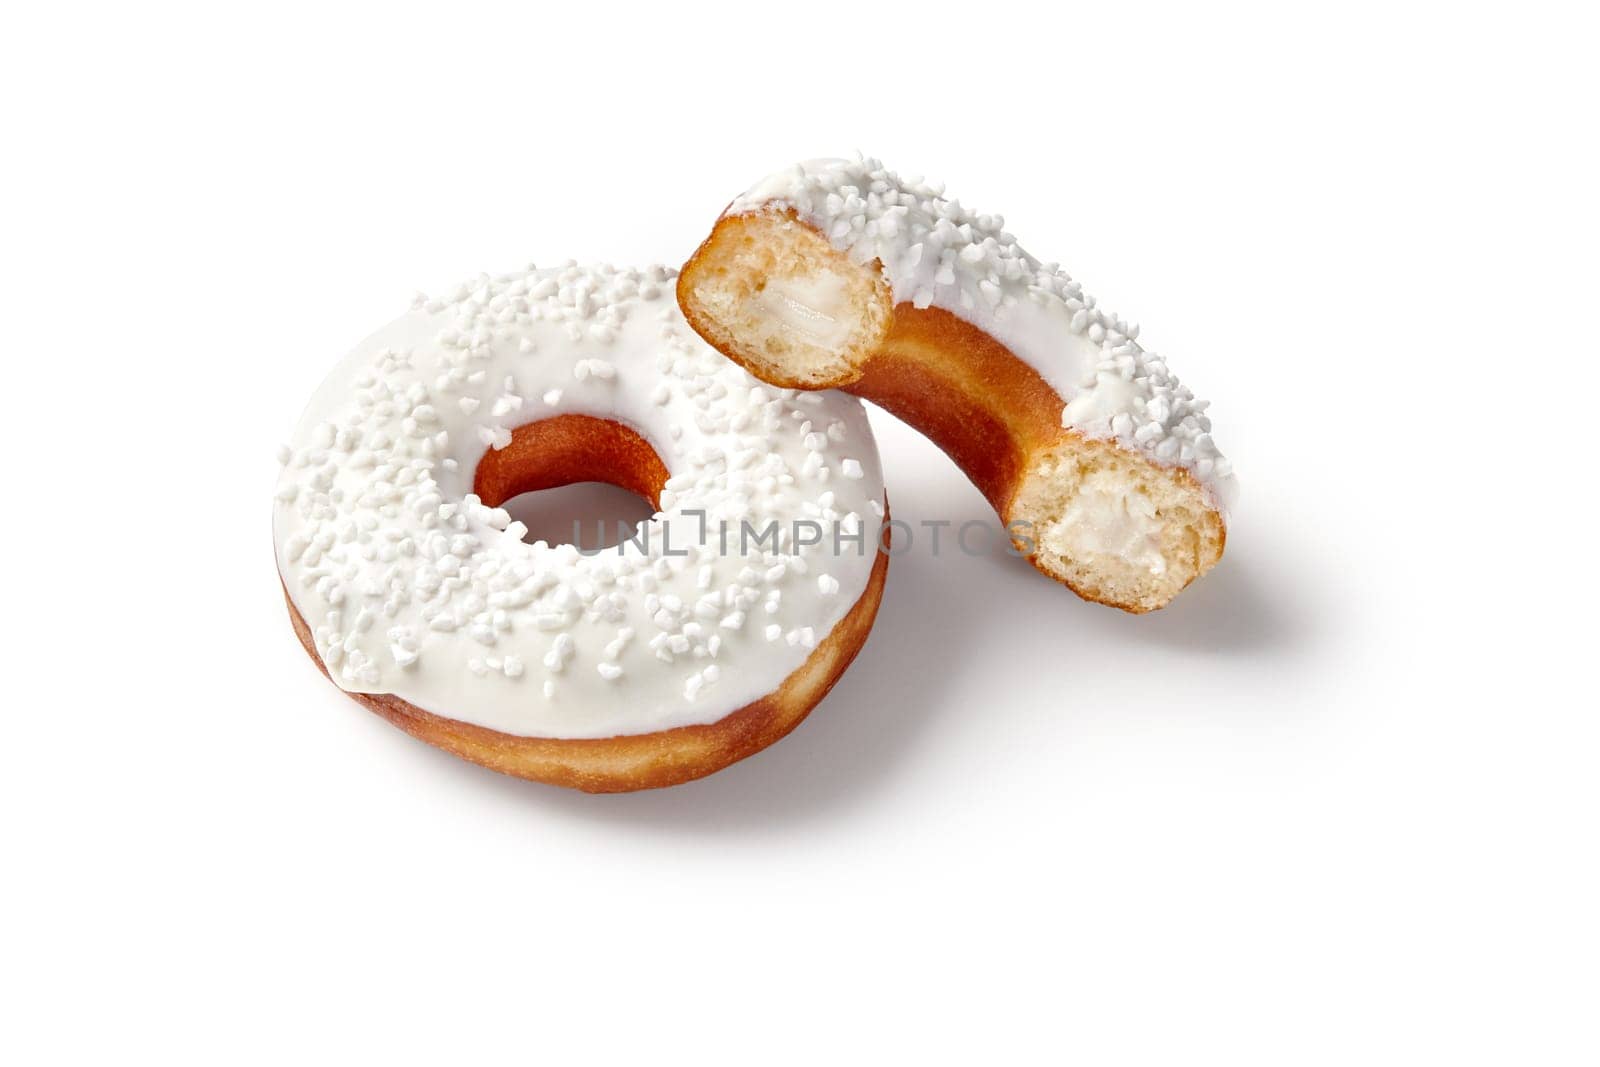 Two sweet soft donuts with creamy filling, white vanilla icing and sugar sprinkles presented on seamless white background. Popular confectioneries